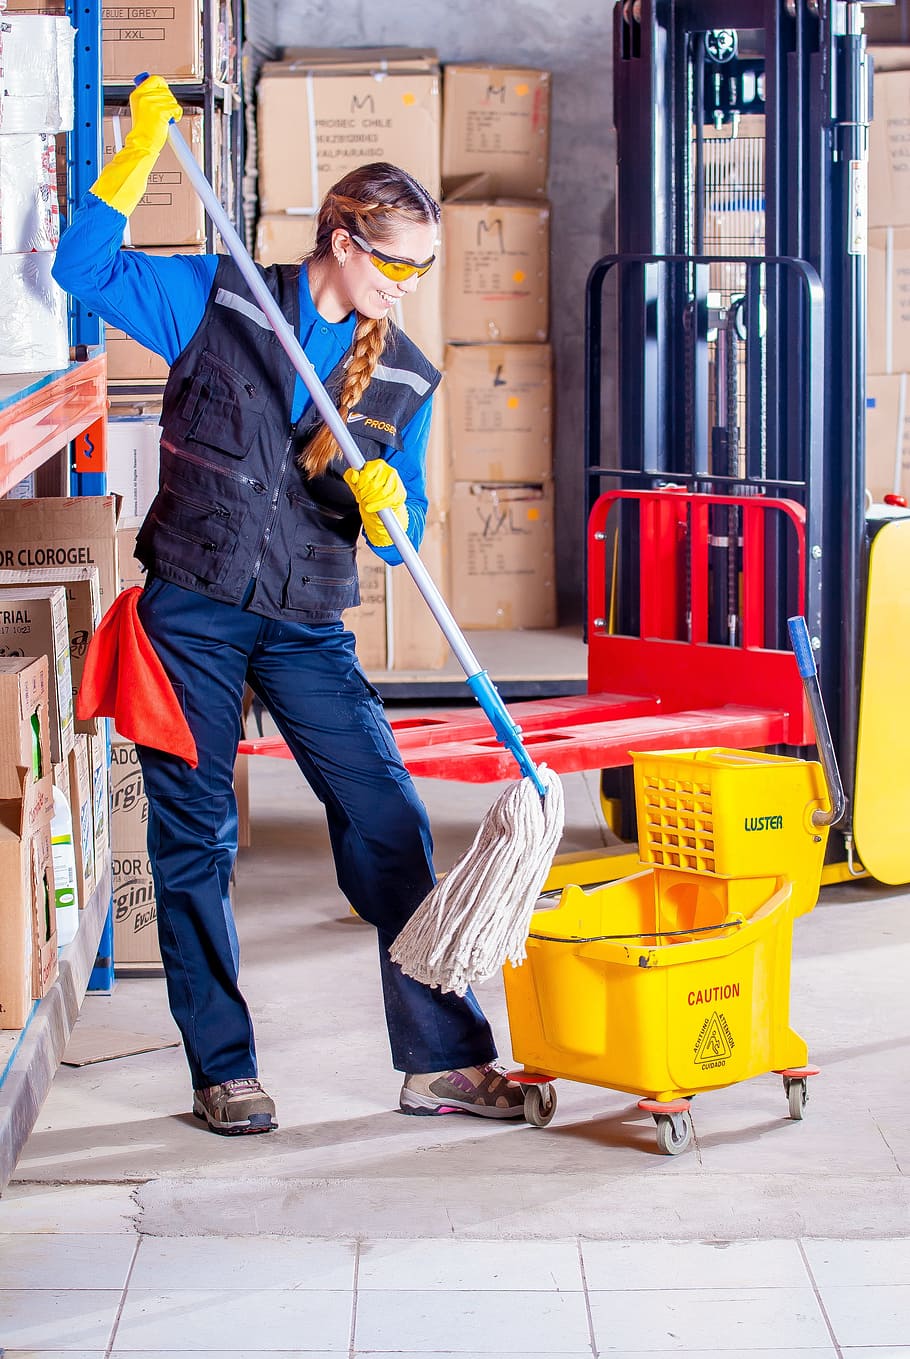 woman, standing, holding, mop, Industrial, Security, Logistic, work clothes, industrial safety, protective goggles